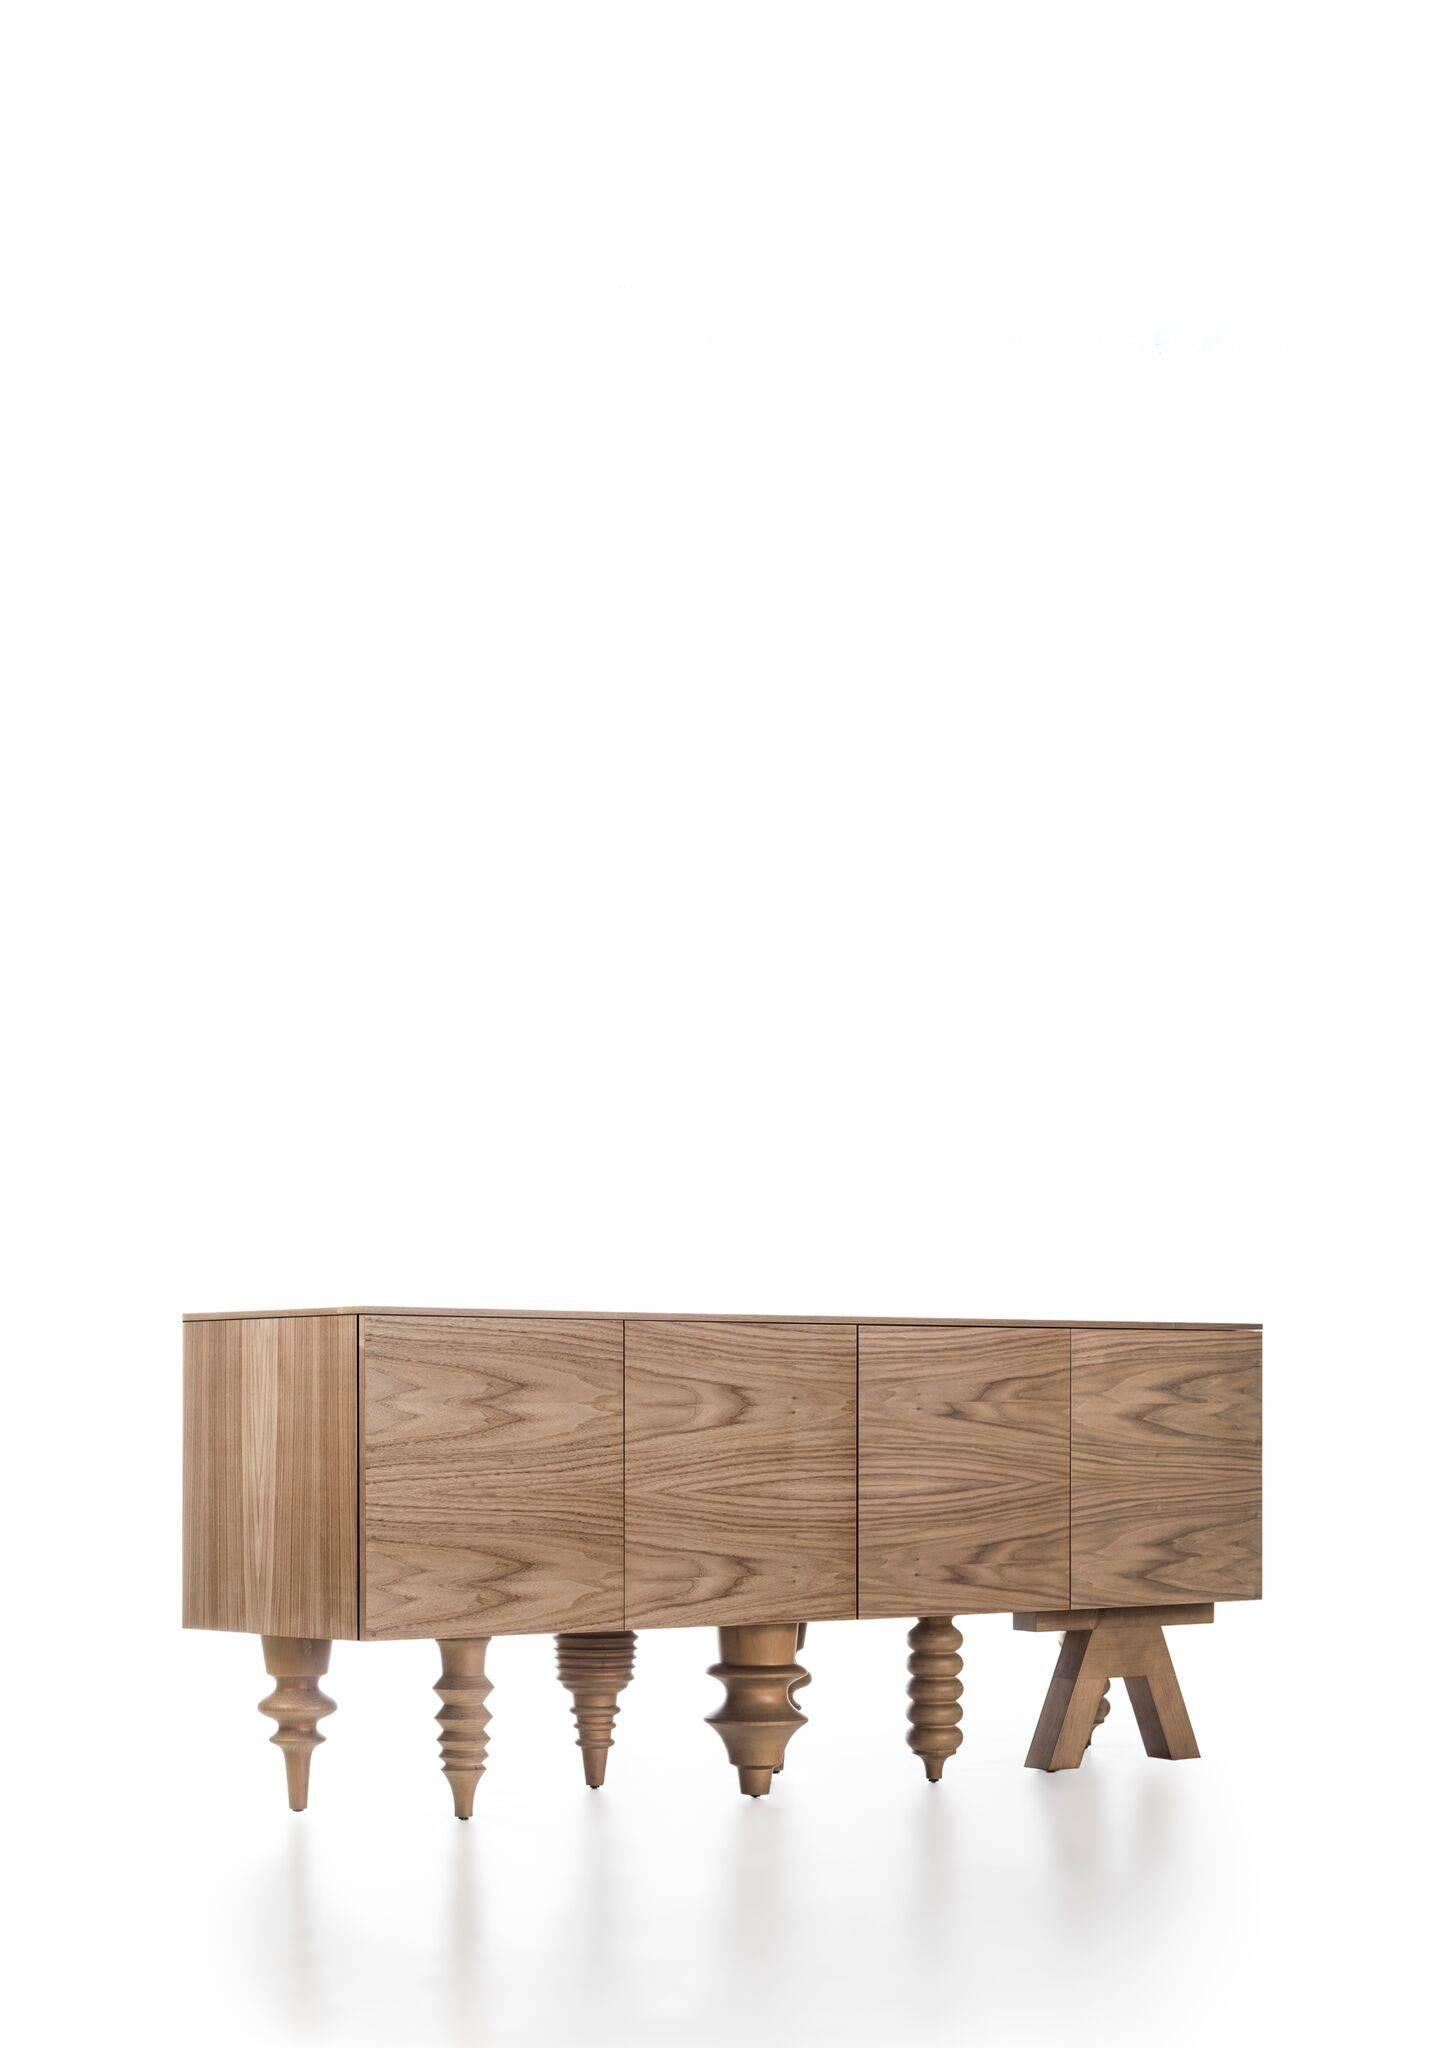 Jaime Hayon multileg cabinet, wooden version, walnut and
walnut nature, with the same virtues as the first: modular, multipurpose and multilegged.

Container and frontal panels in 19mm MDF and shelves in 25mm MDF.
Inside, back panel, doors, and